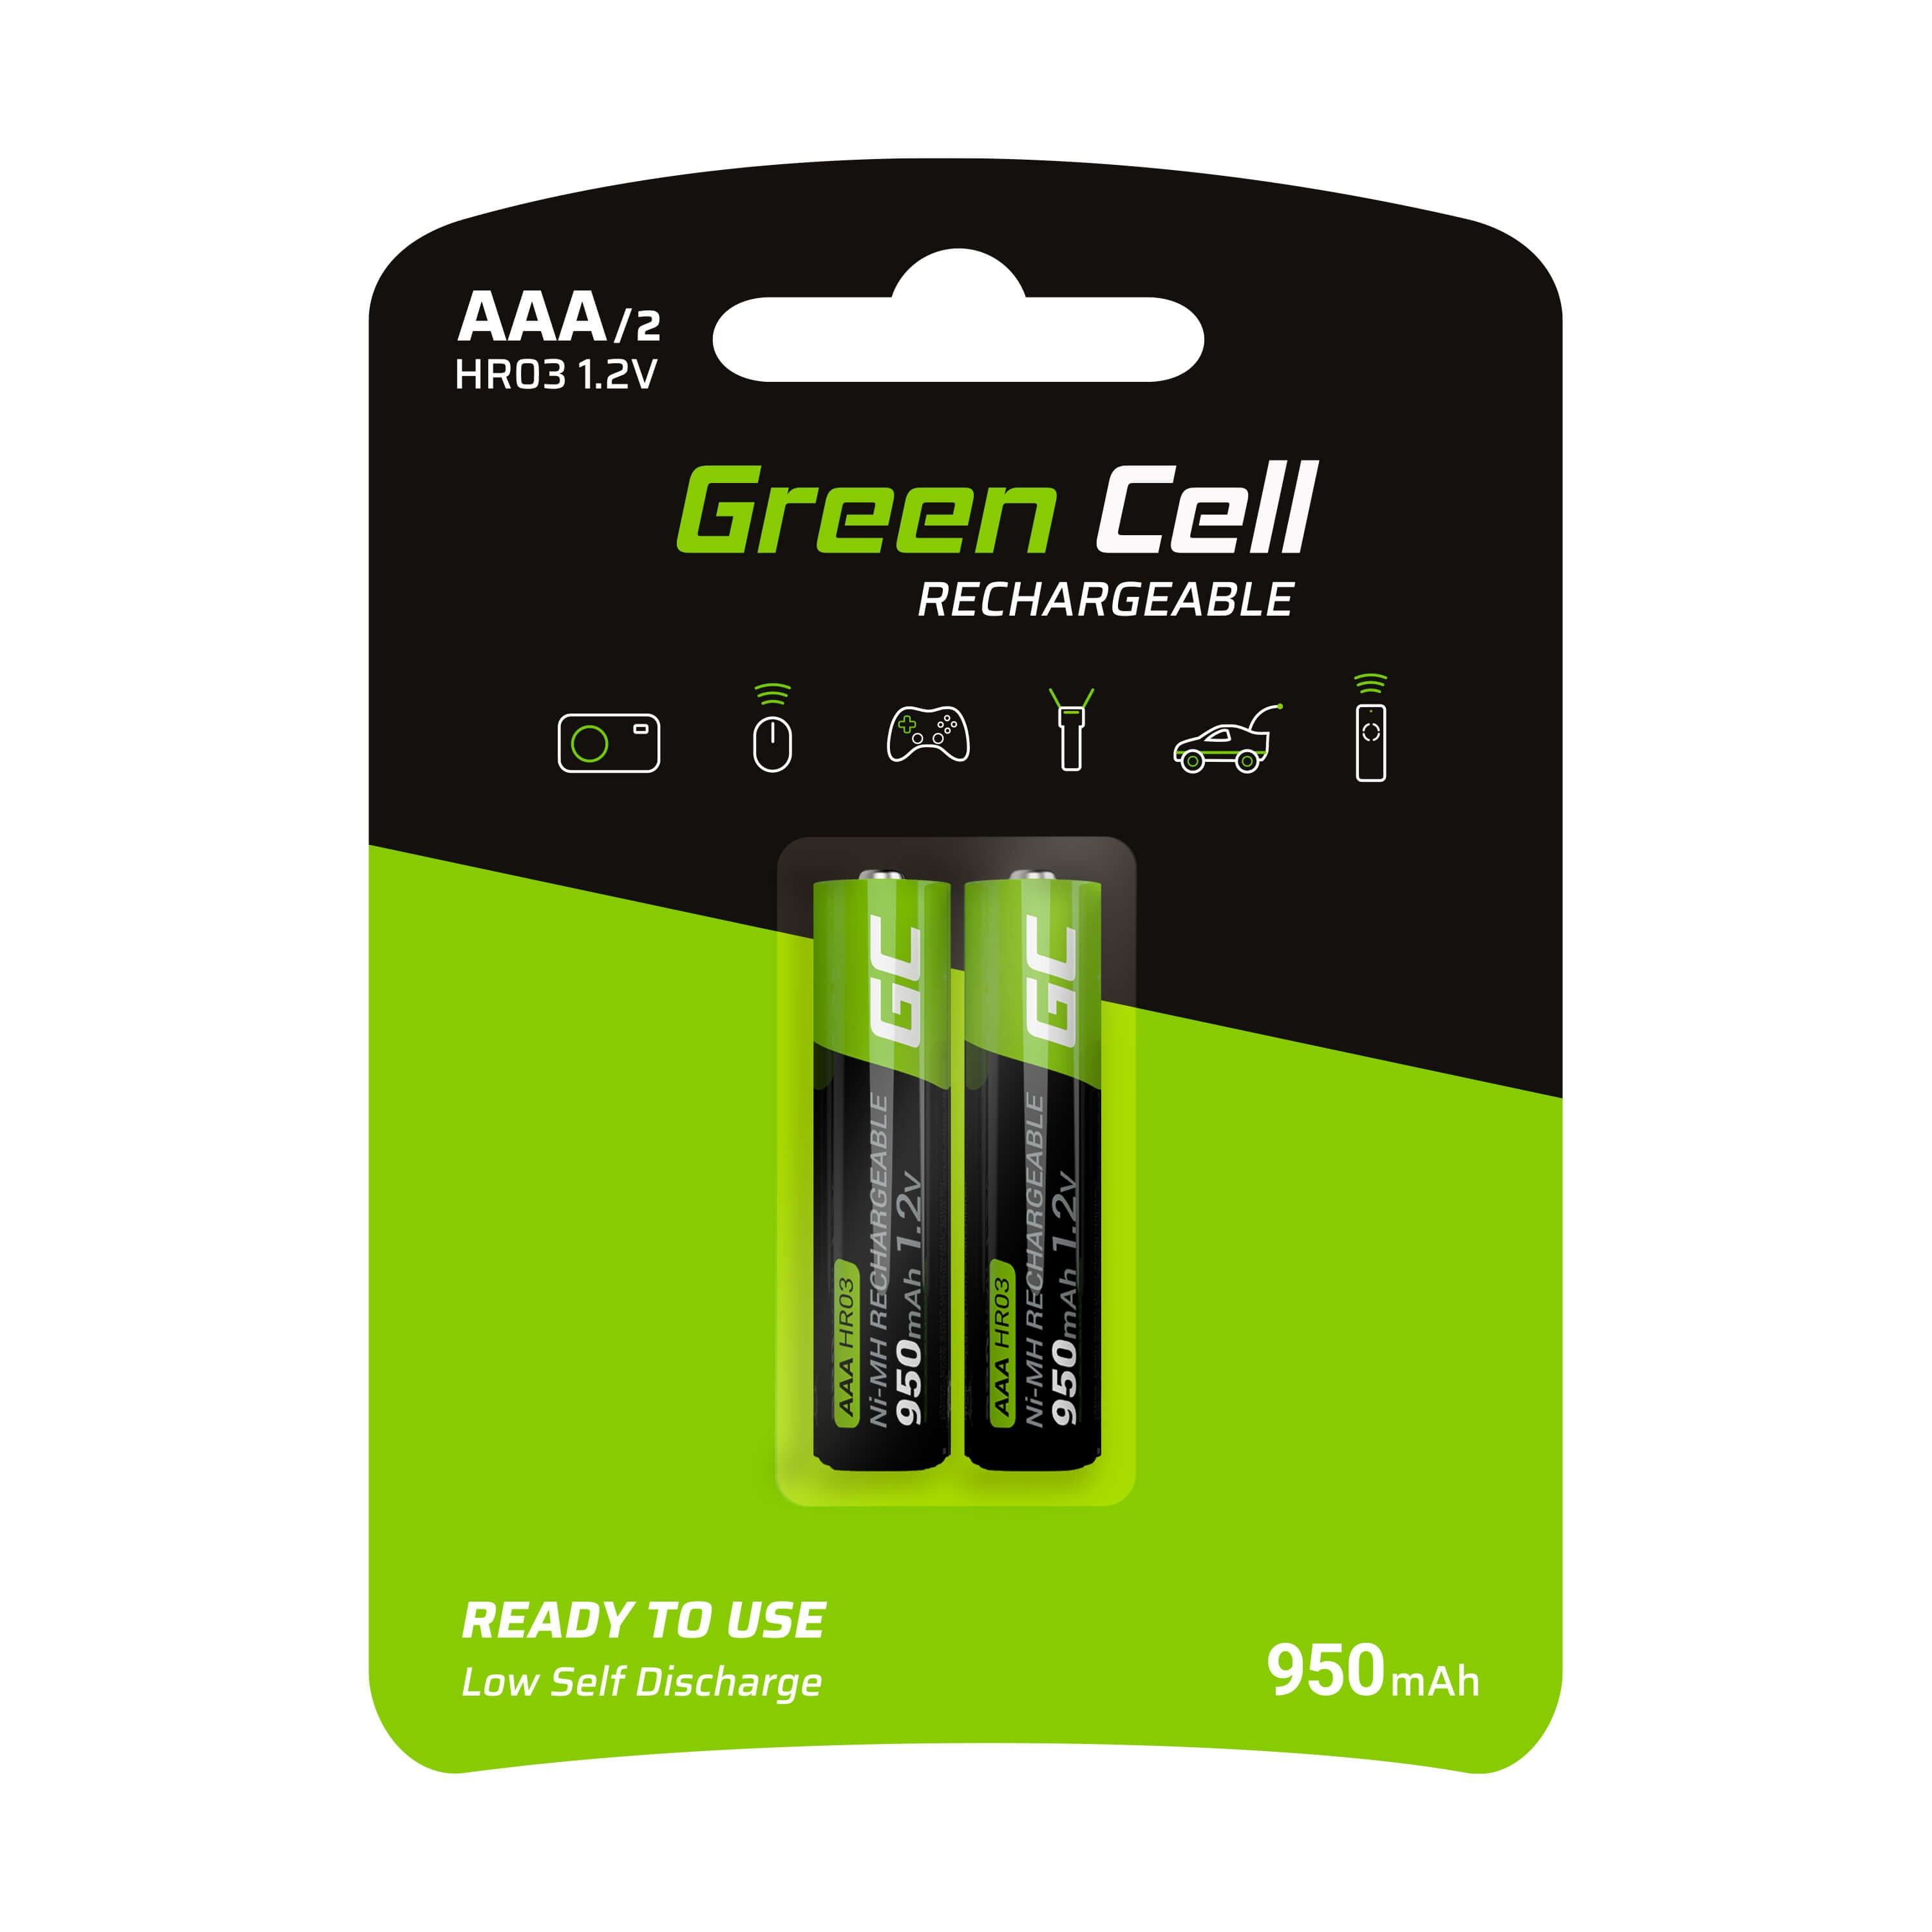 Green Cell GR07 household battery Rechargeable battery AAA Nickel-Metal Hydride (NiMH) 2X AAA R3 950MAH_1